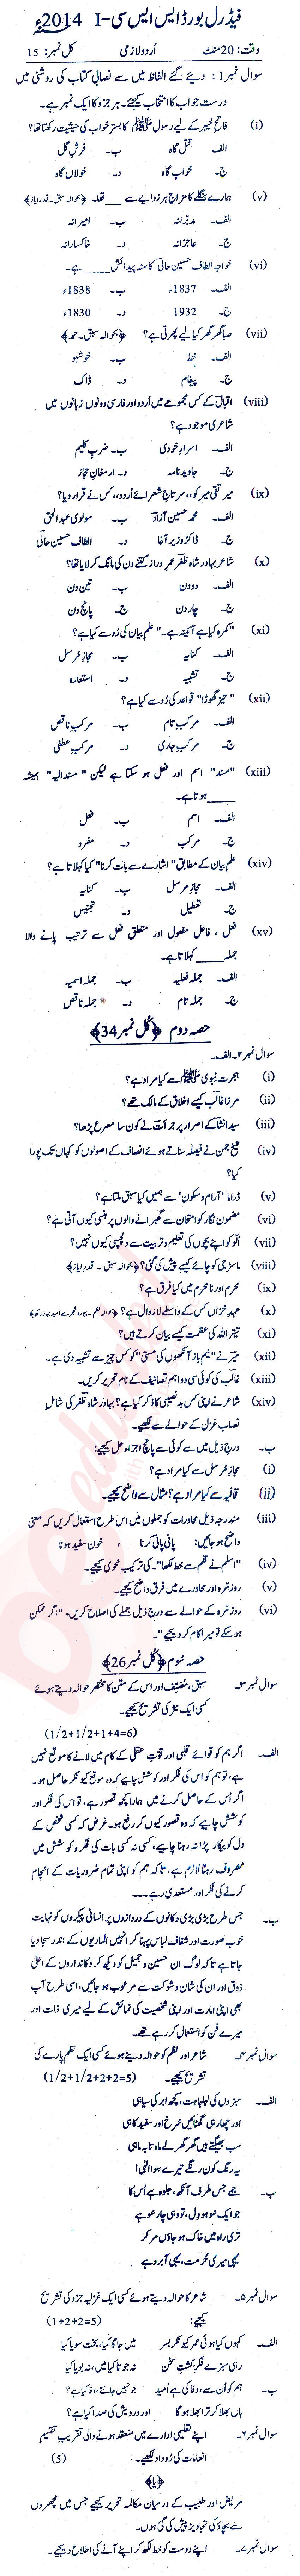 Urdu 9th class Past Paper Group 1 Federal BISE  2014